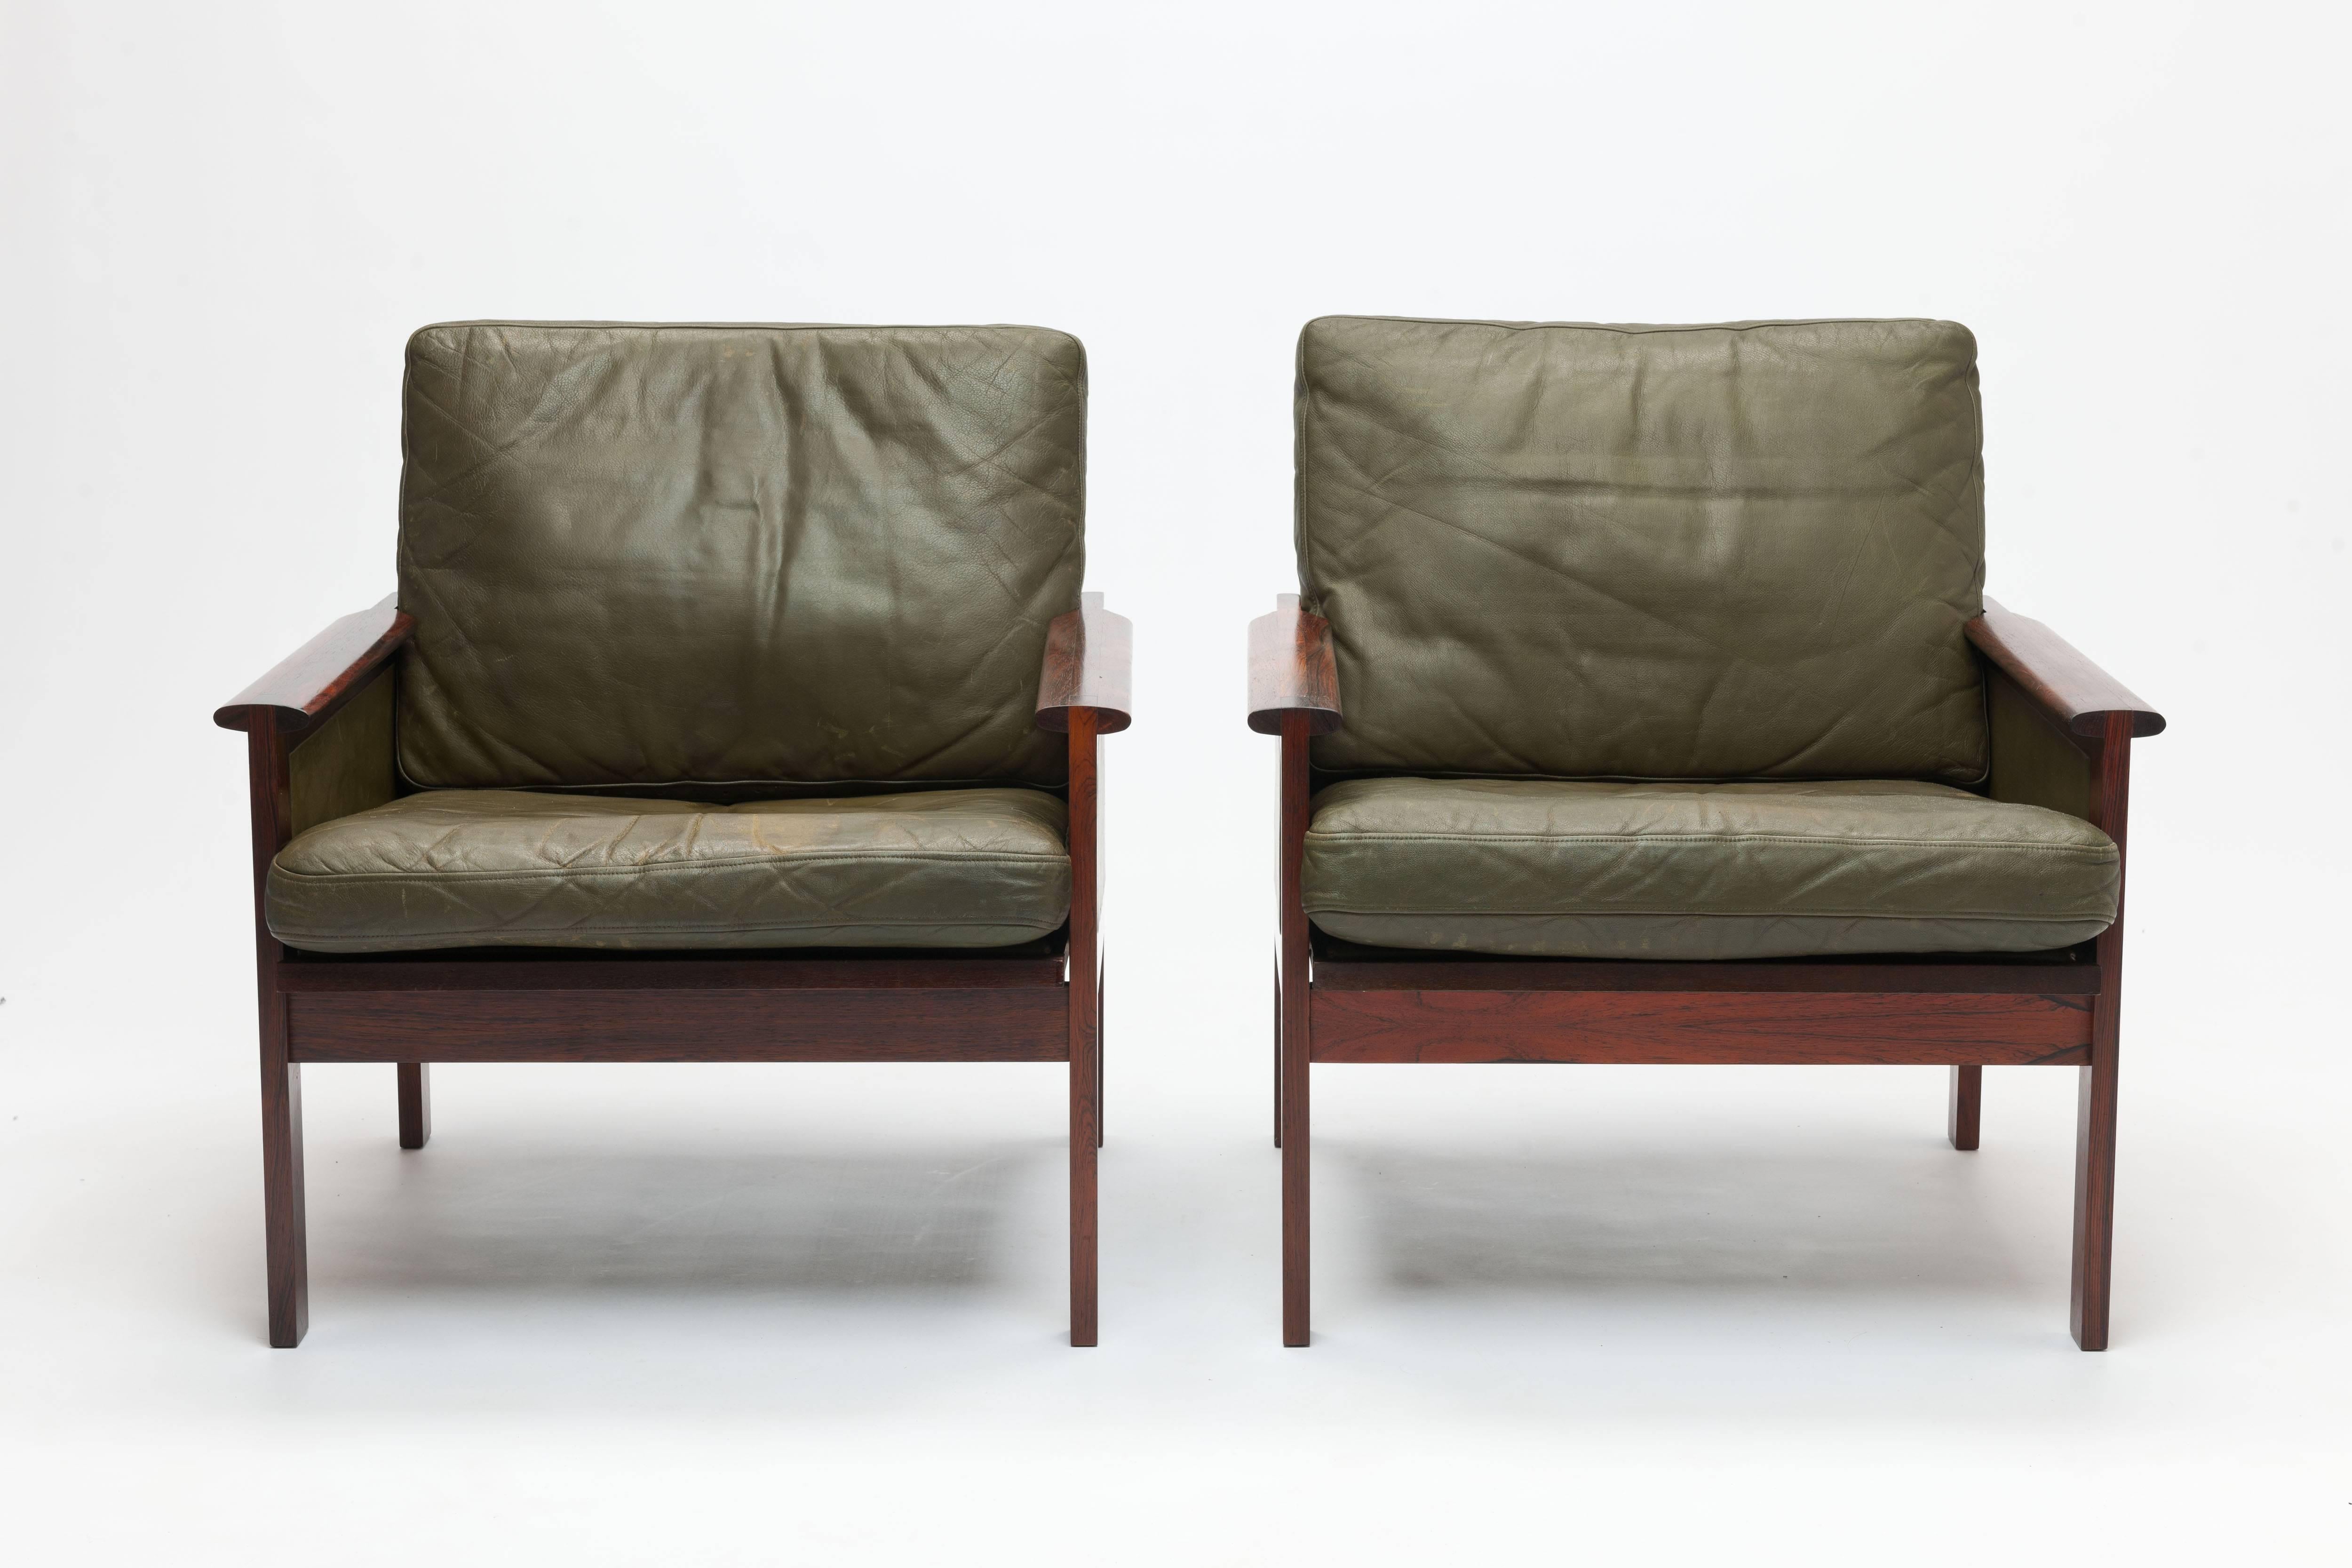 Beautiful set of two all original rosewood and green leather armchairs by Illum Wikkelsø (Denmark, 1919-1999), designed in 1959 for N. Eilersen. Wikkelsø’s background in cabinetry engendered in him a profound understanding of materials and an